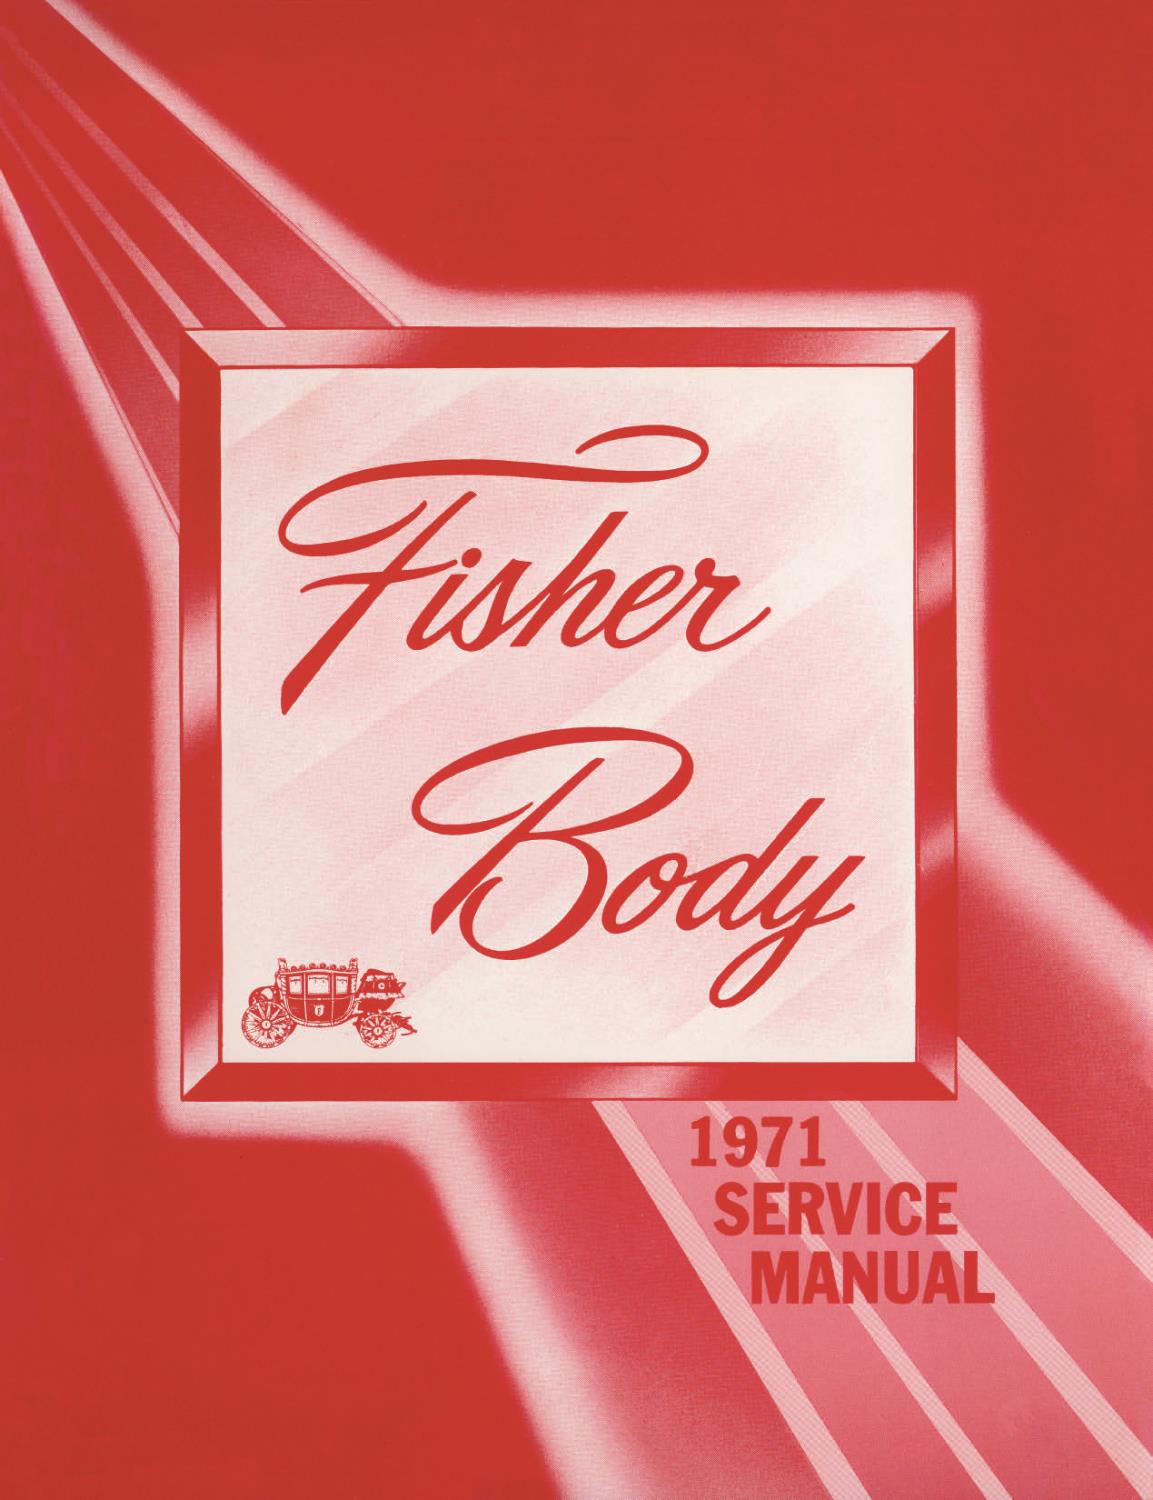 Fisher Body Service Manual for 1971 Buick, Cadillac, Chevrolet, Oldsmobile and Pontiac Models, A-B-C-D-E-F-X Body Styles